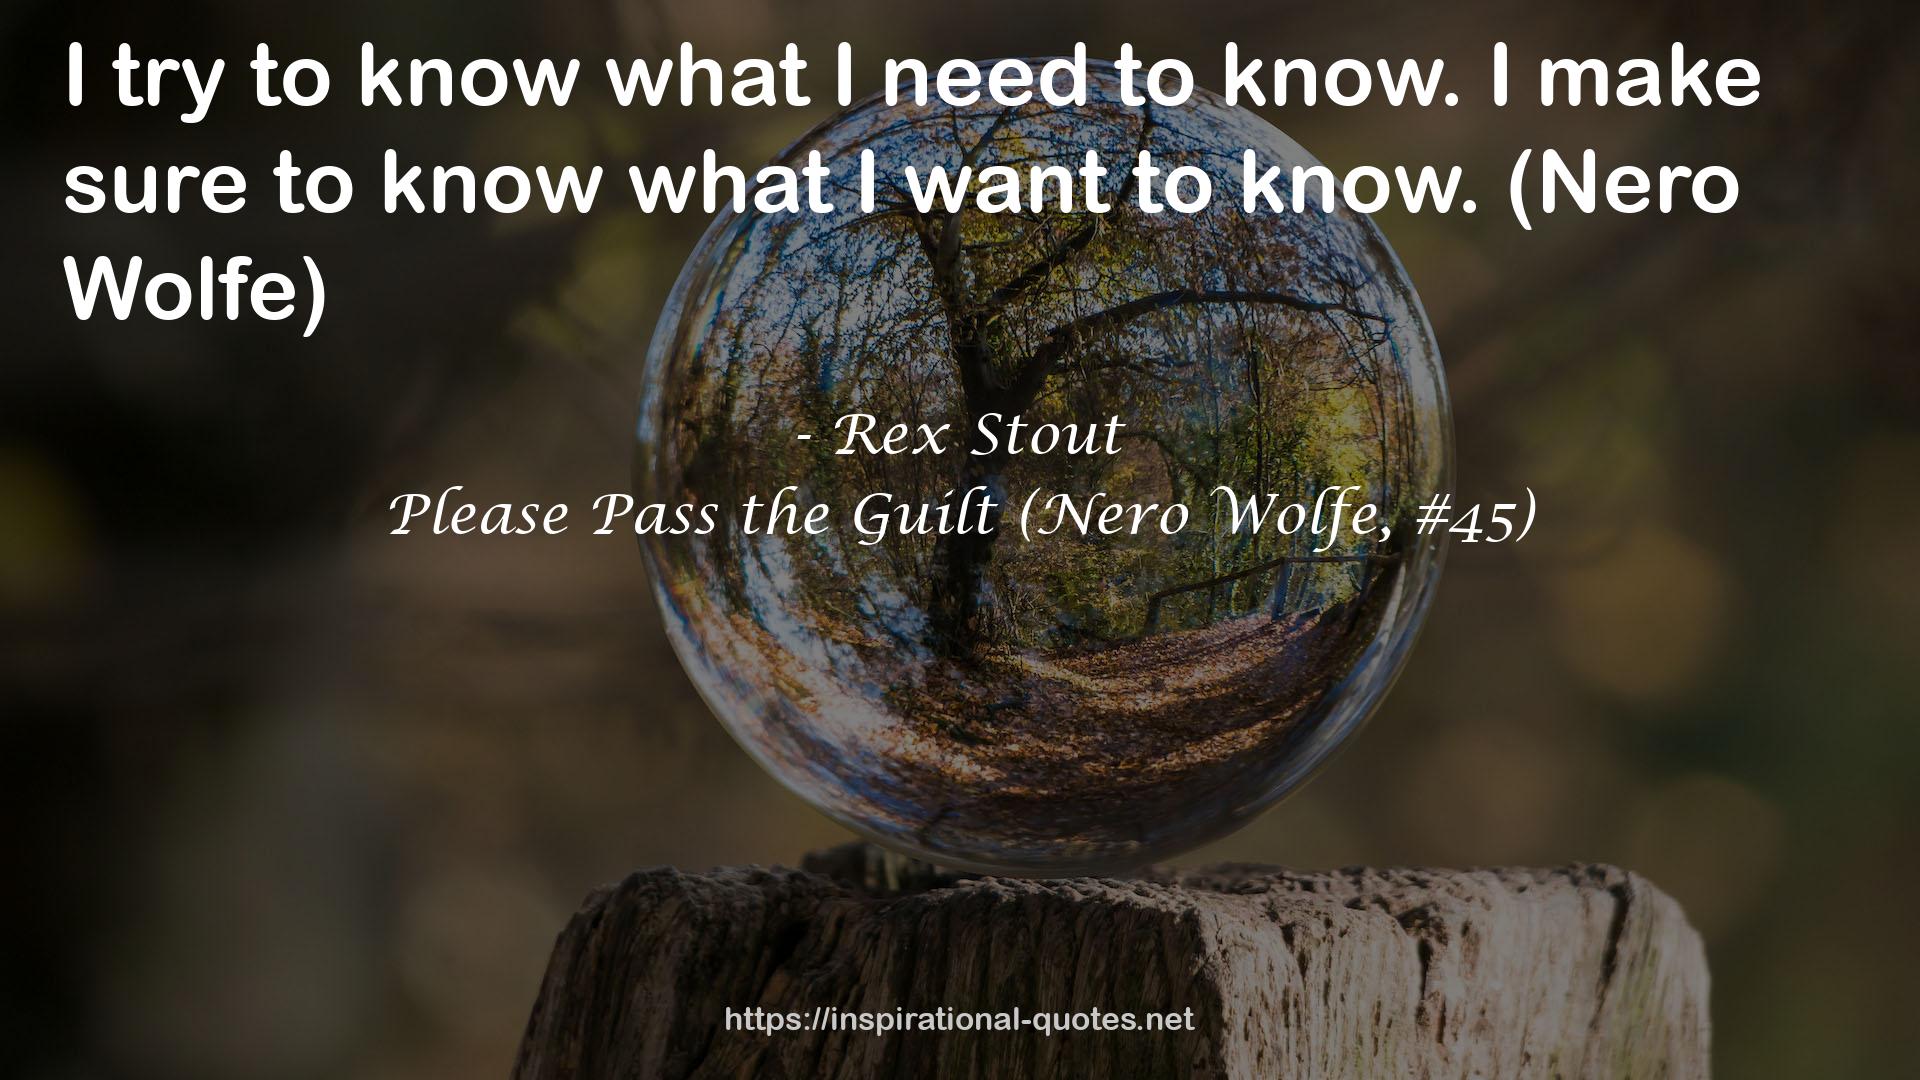 Please Pass the Guilt (Nero Wolfe, #45) QUOTES